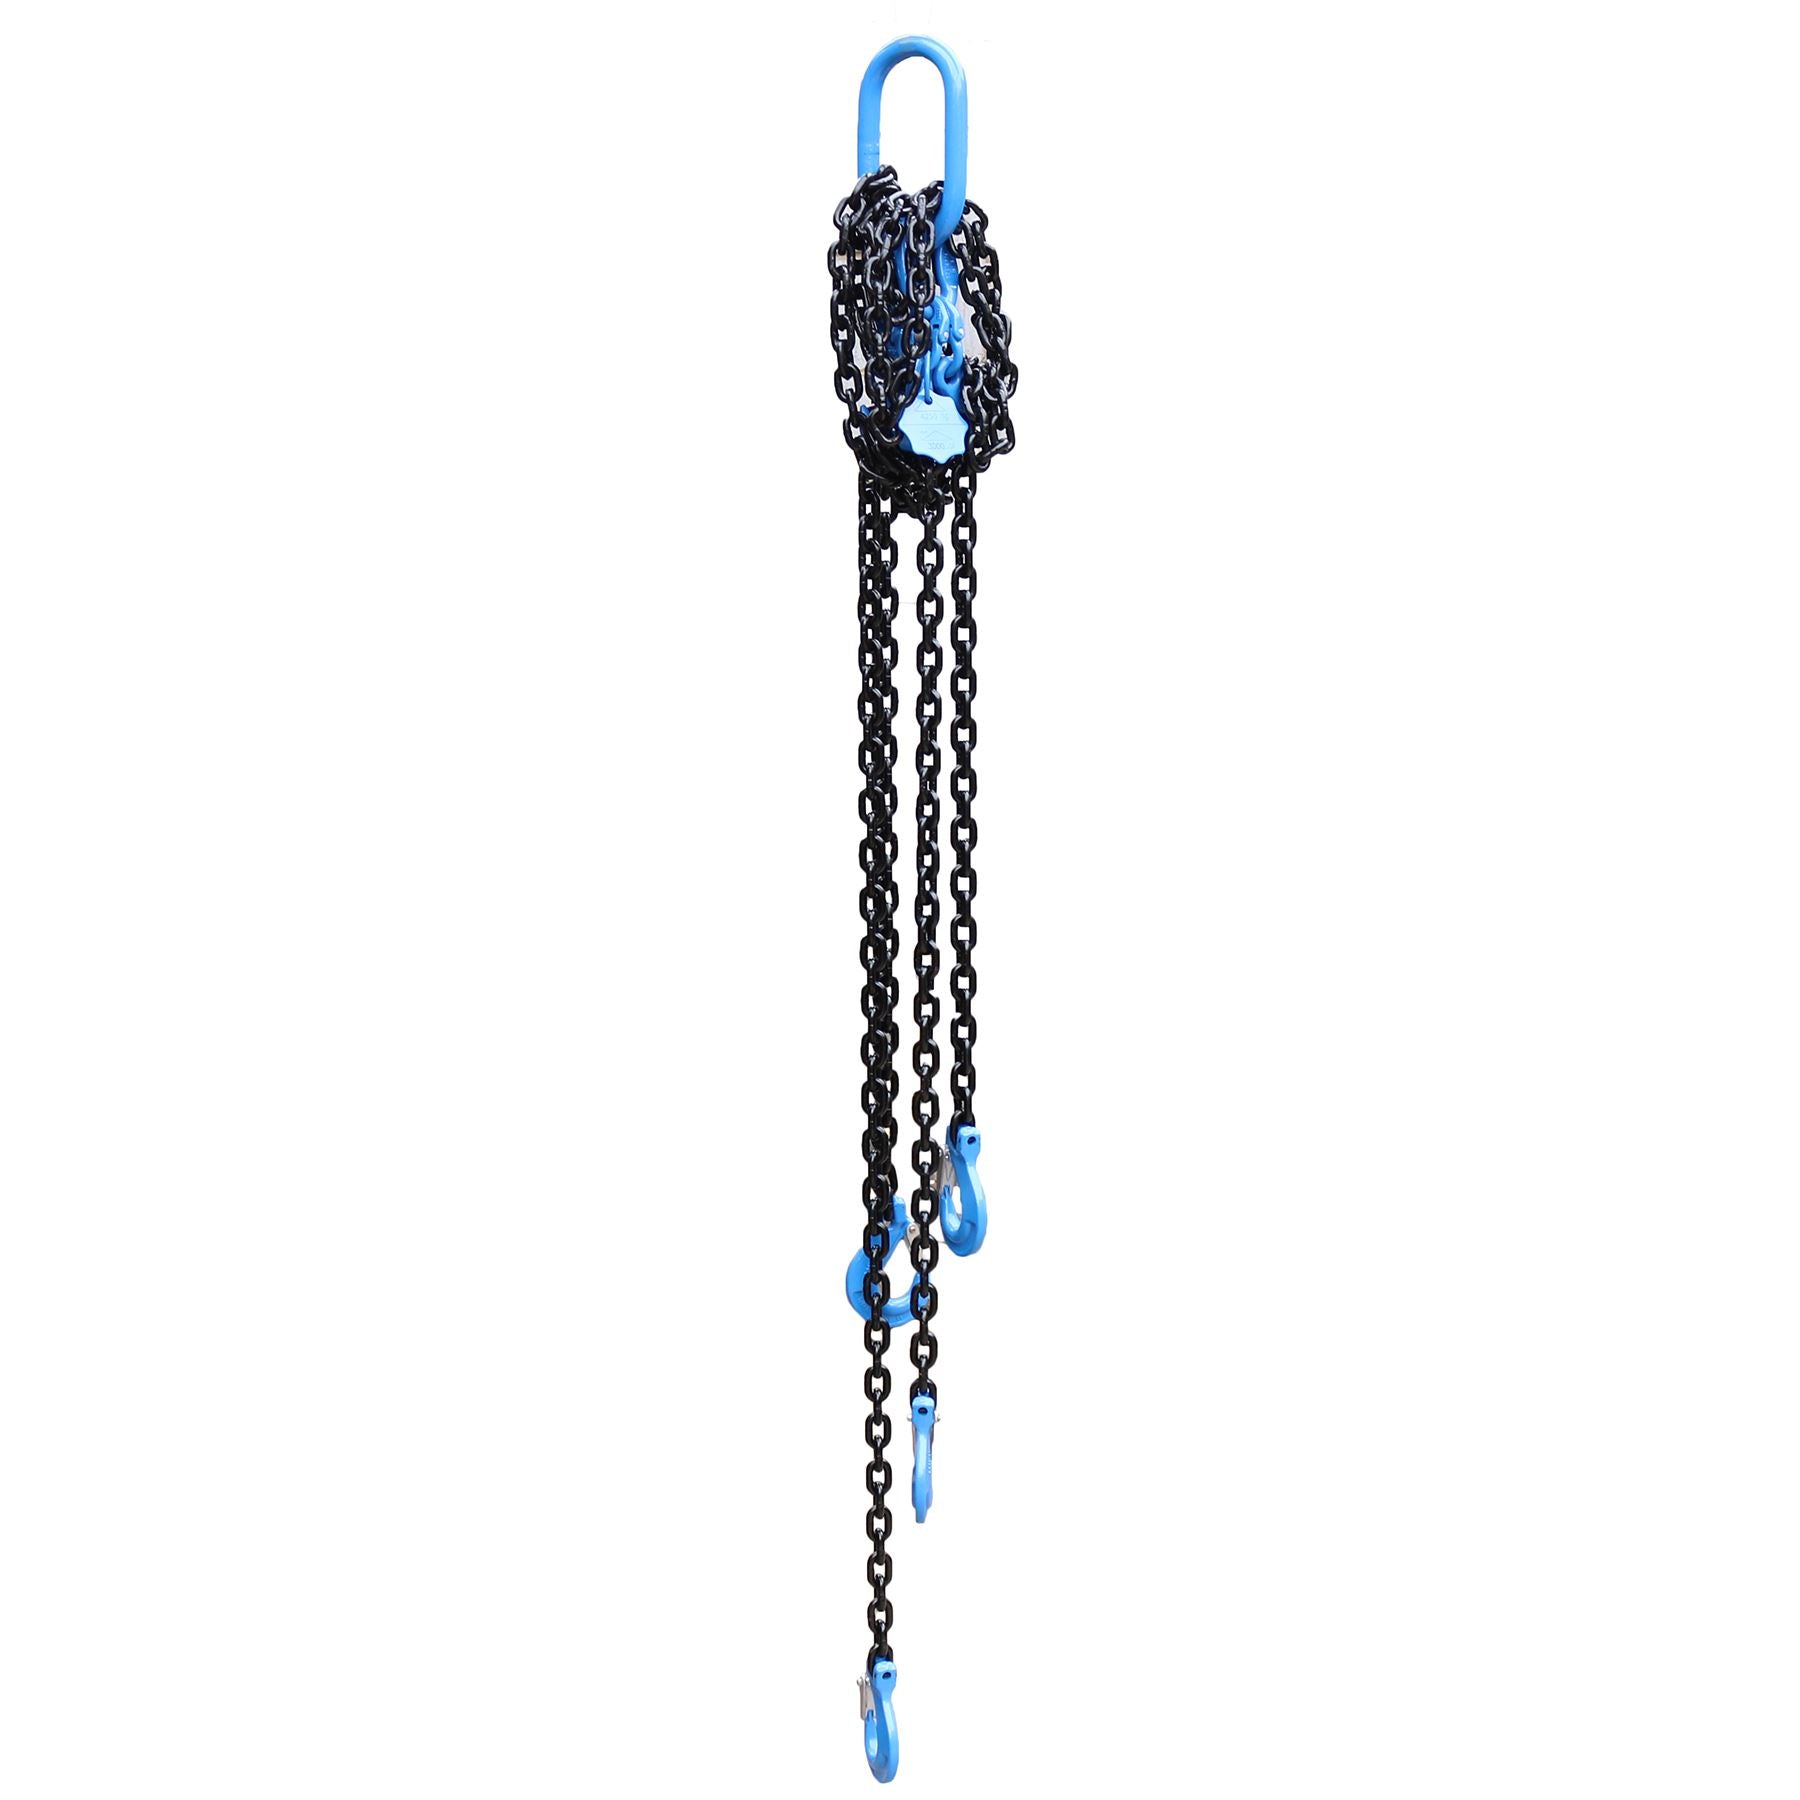 4 Leg Lifting Chain Sling with Clevis Grab Hook 2 Metre 8mm Chain WLL 4.26 Ton